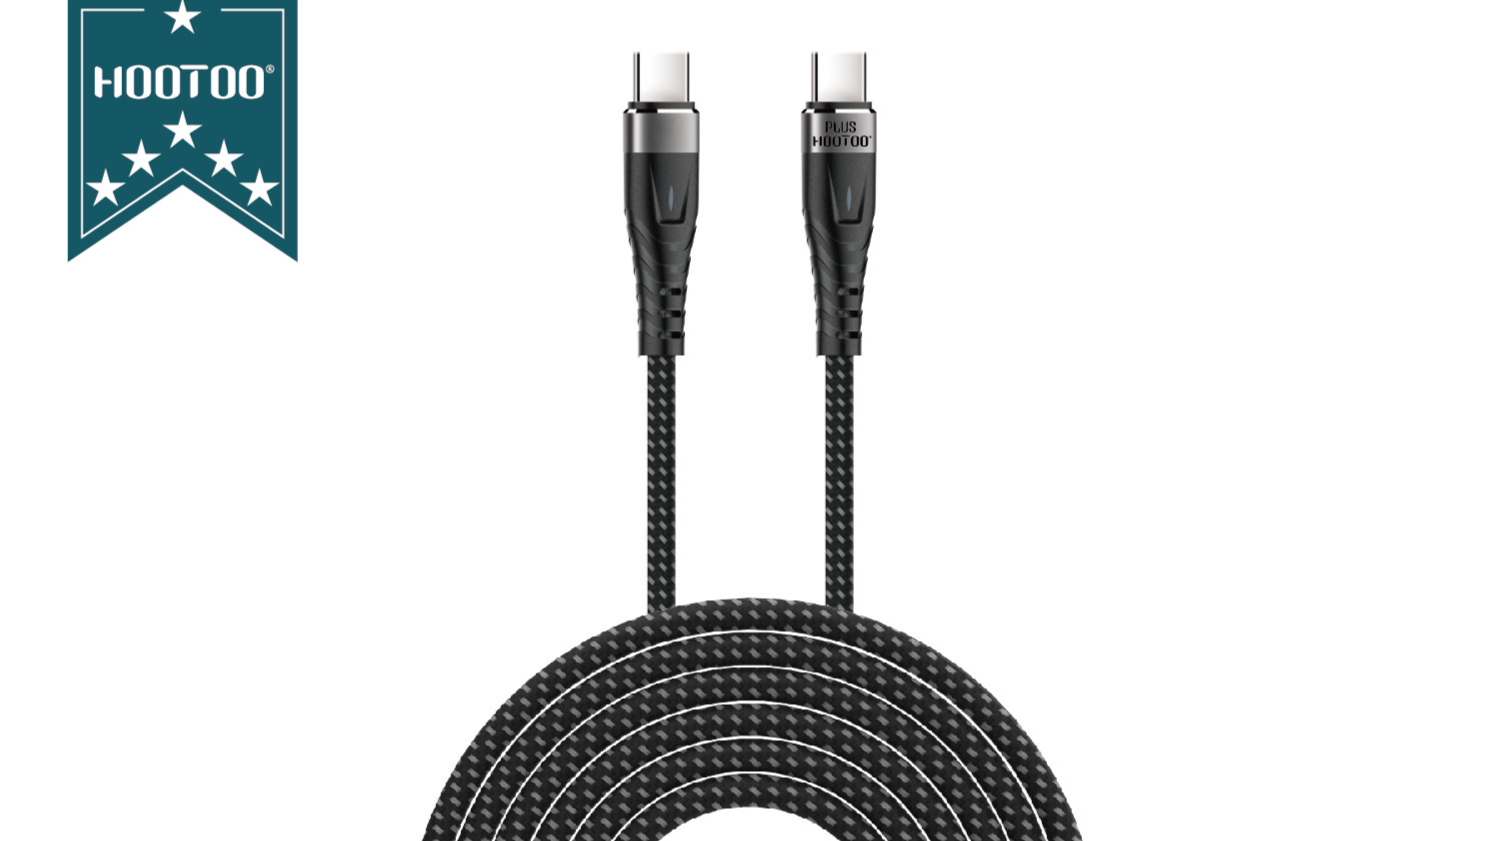 CABLE HT-089